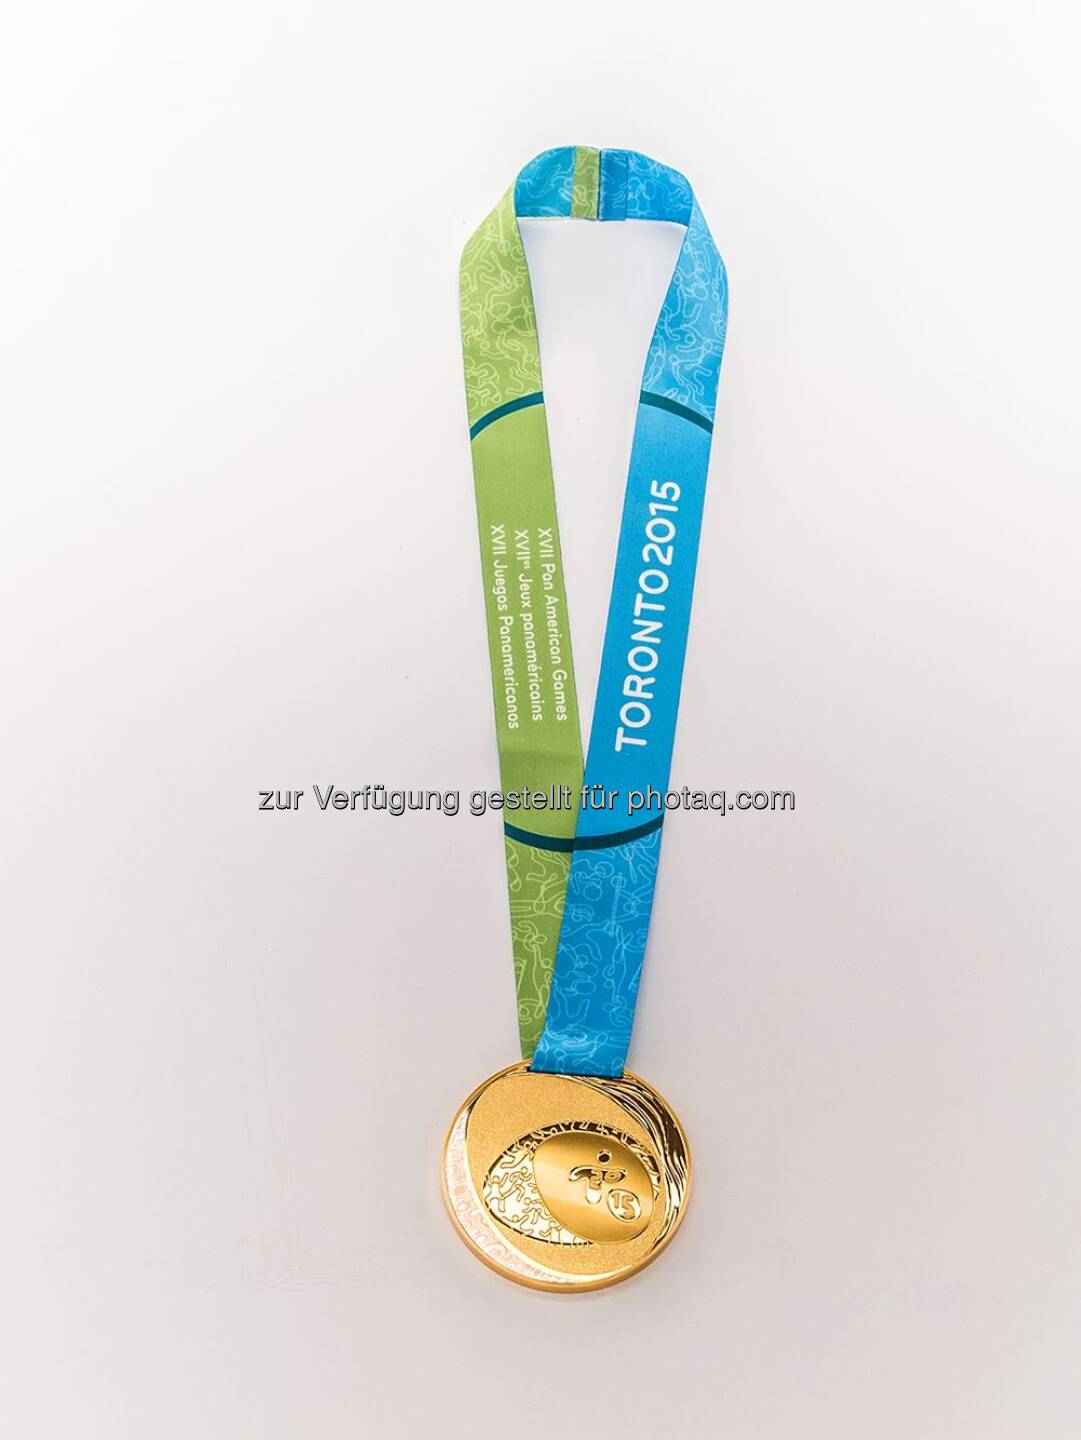 Barrick Gold - Grab your long johns — tomorrow we'll head up north and see who's making Ontario gold for the TORONTO 2015 Pan Am and Parapan Am Games medals.  Source: http://facebook.com/barrick.gold.corporation